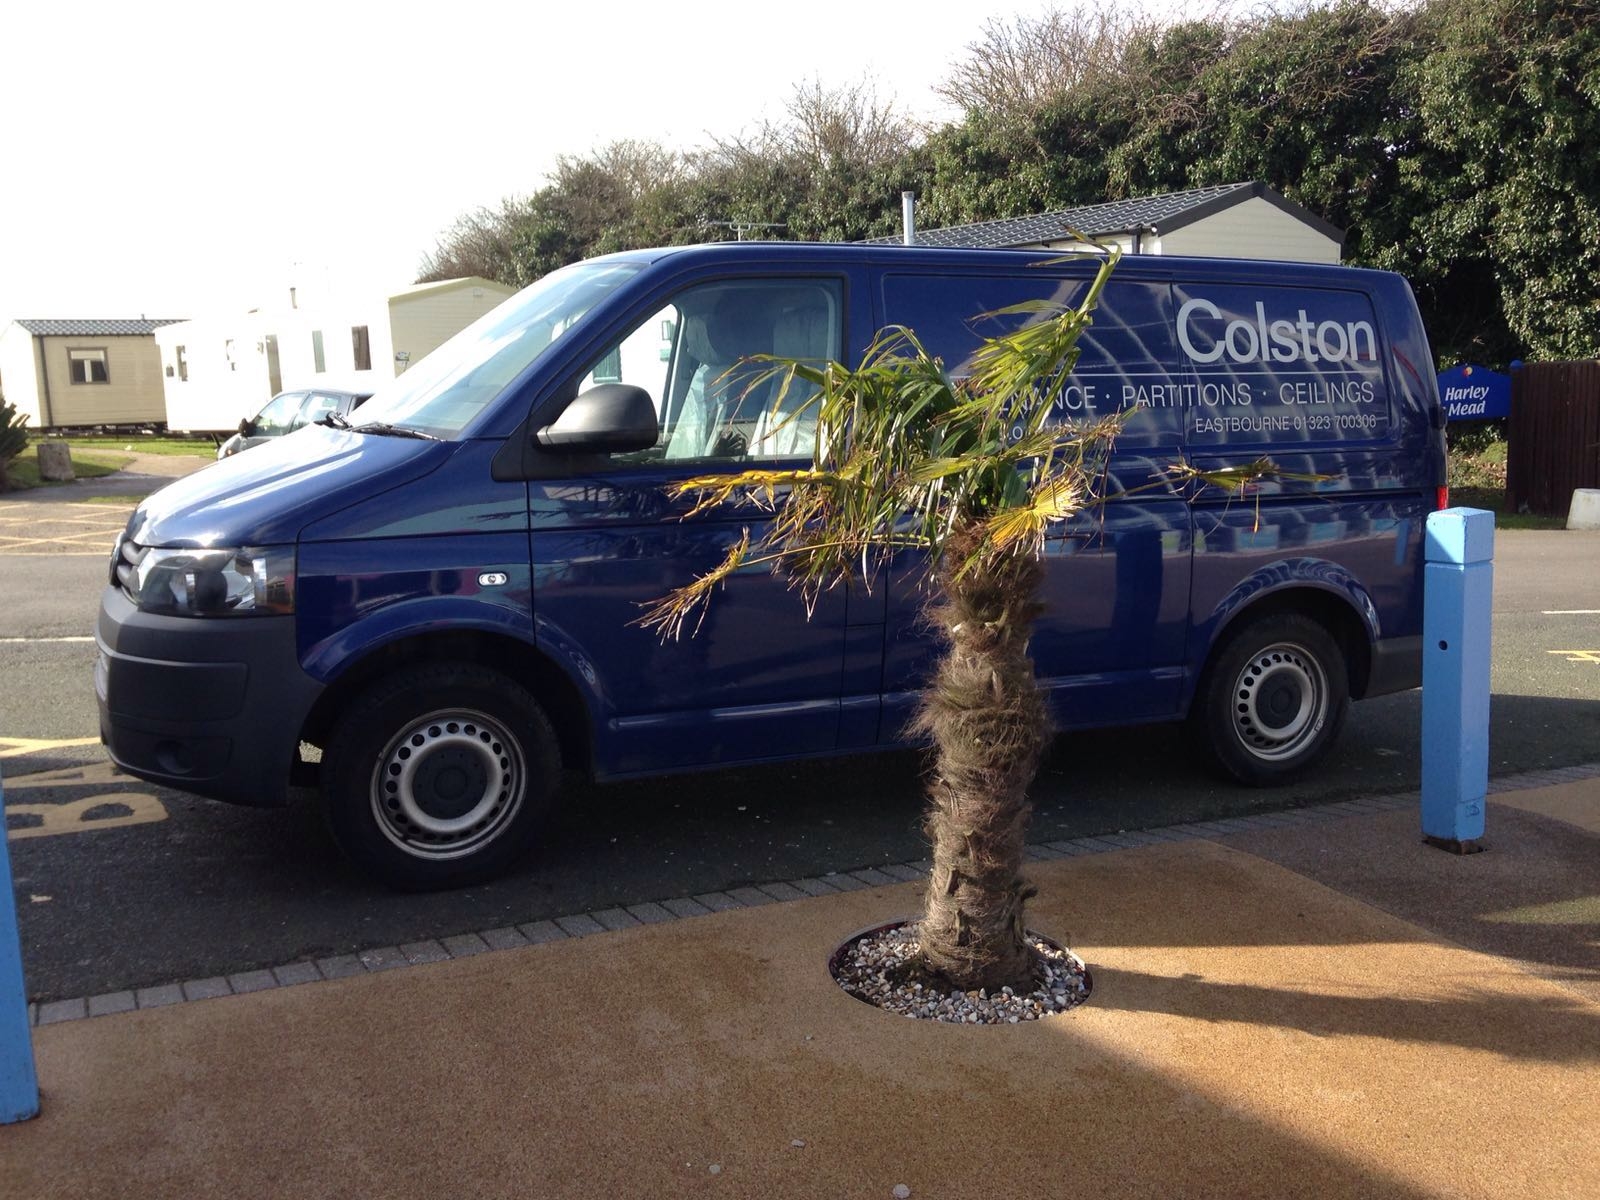 our professional builder in Eastbourne van on their way to a new job to complete at superior construction quality